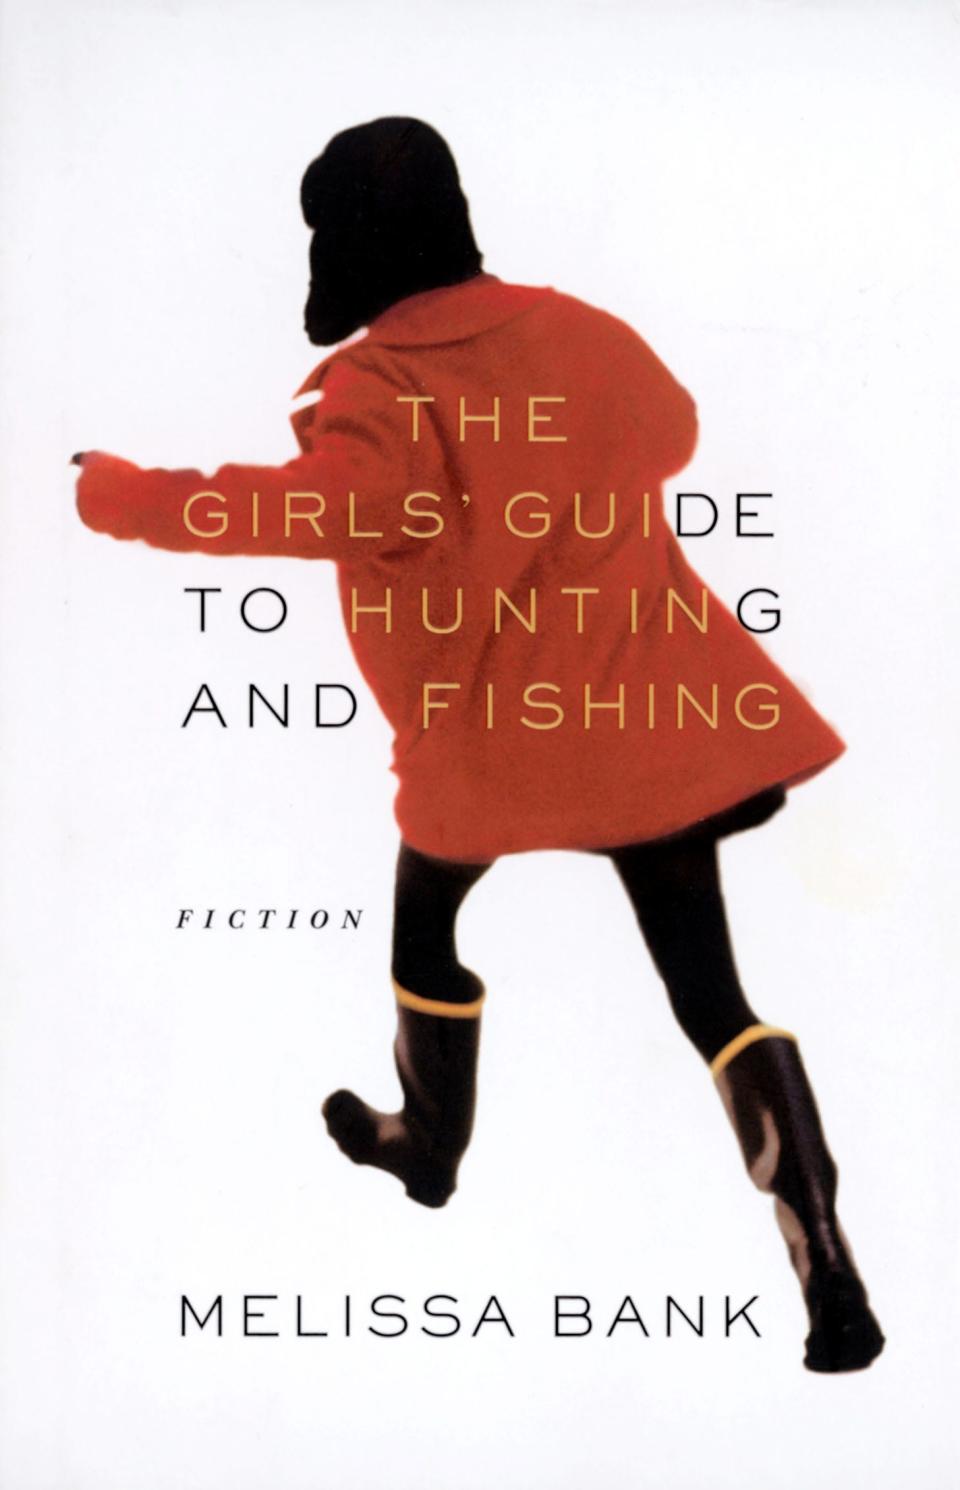 "The Girls' Guide to Hunting and Fishing," by Melissa Bank.